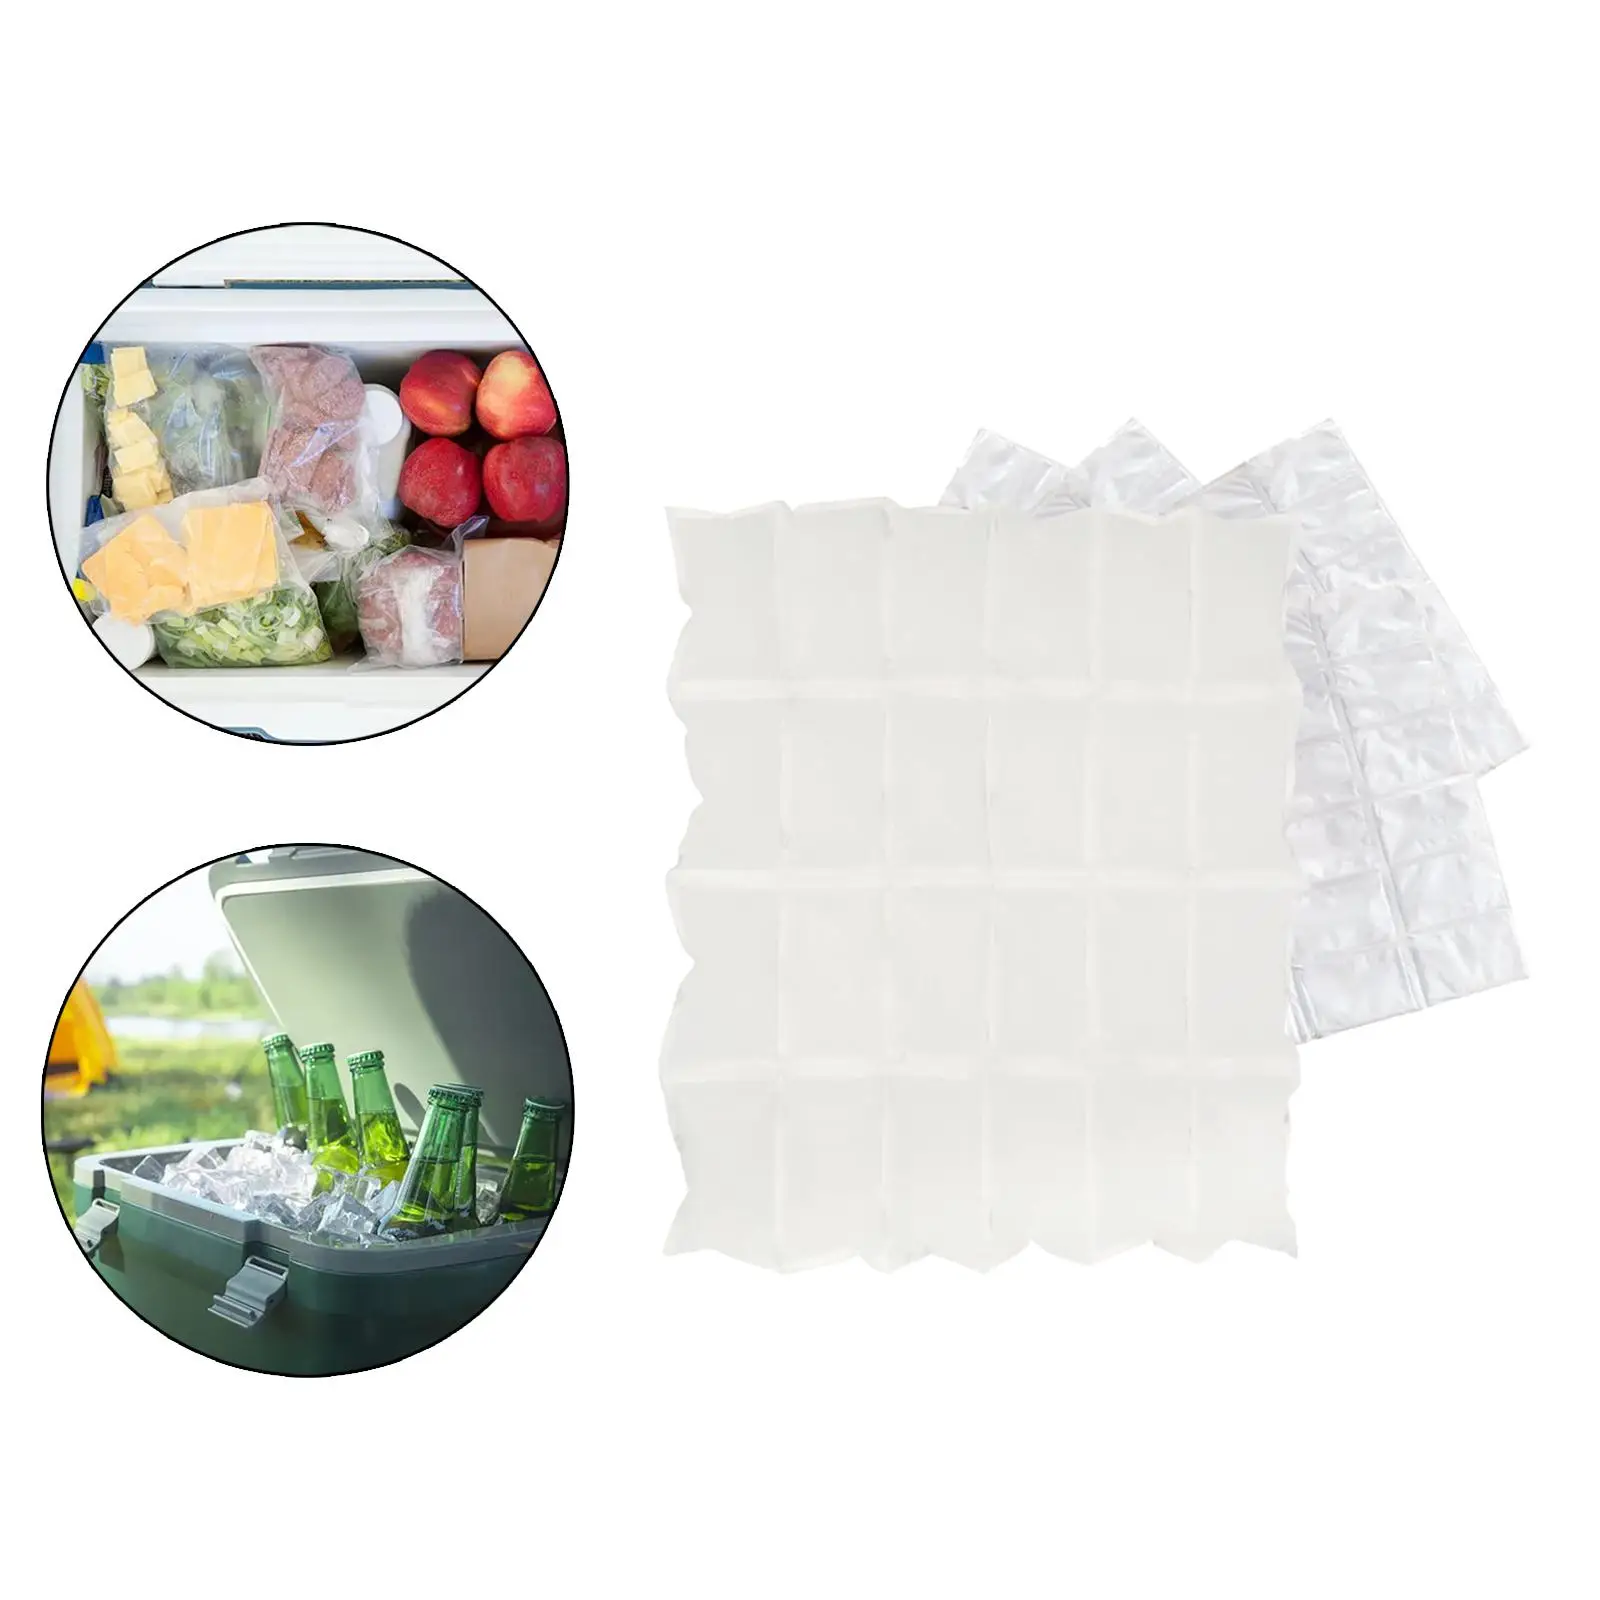 120 Pieces Ice Packs Cuttable Cold Packs for Fresh Food Storage Shipping Food Keep Food Fresh Lunch Bags Refrigerate Food